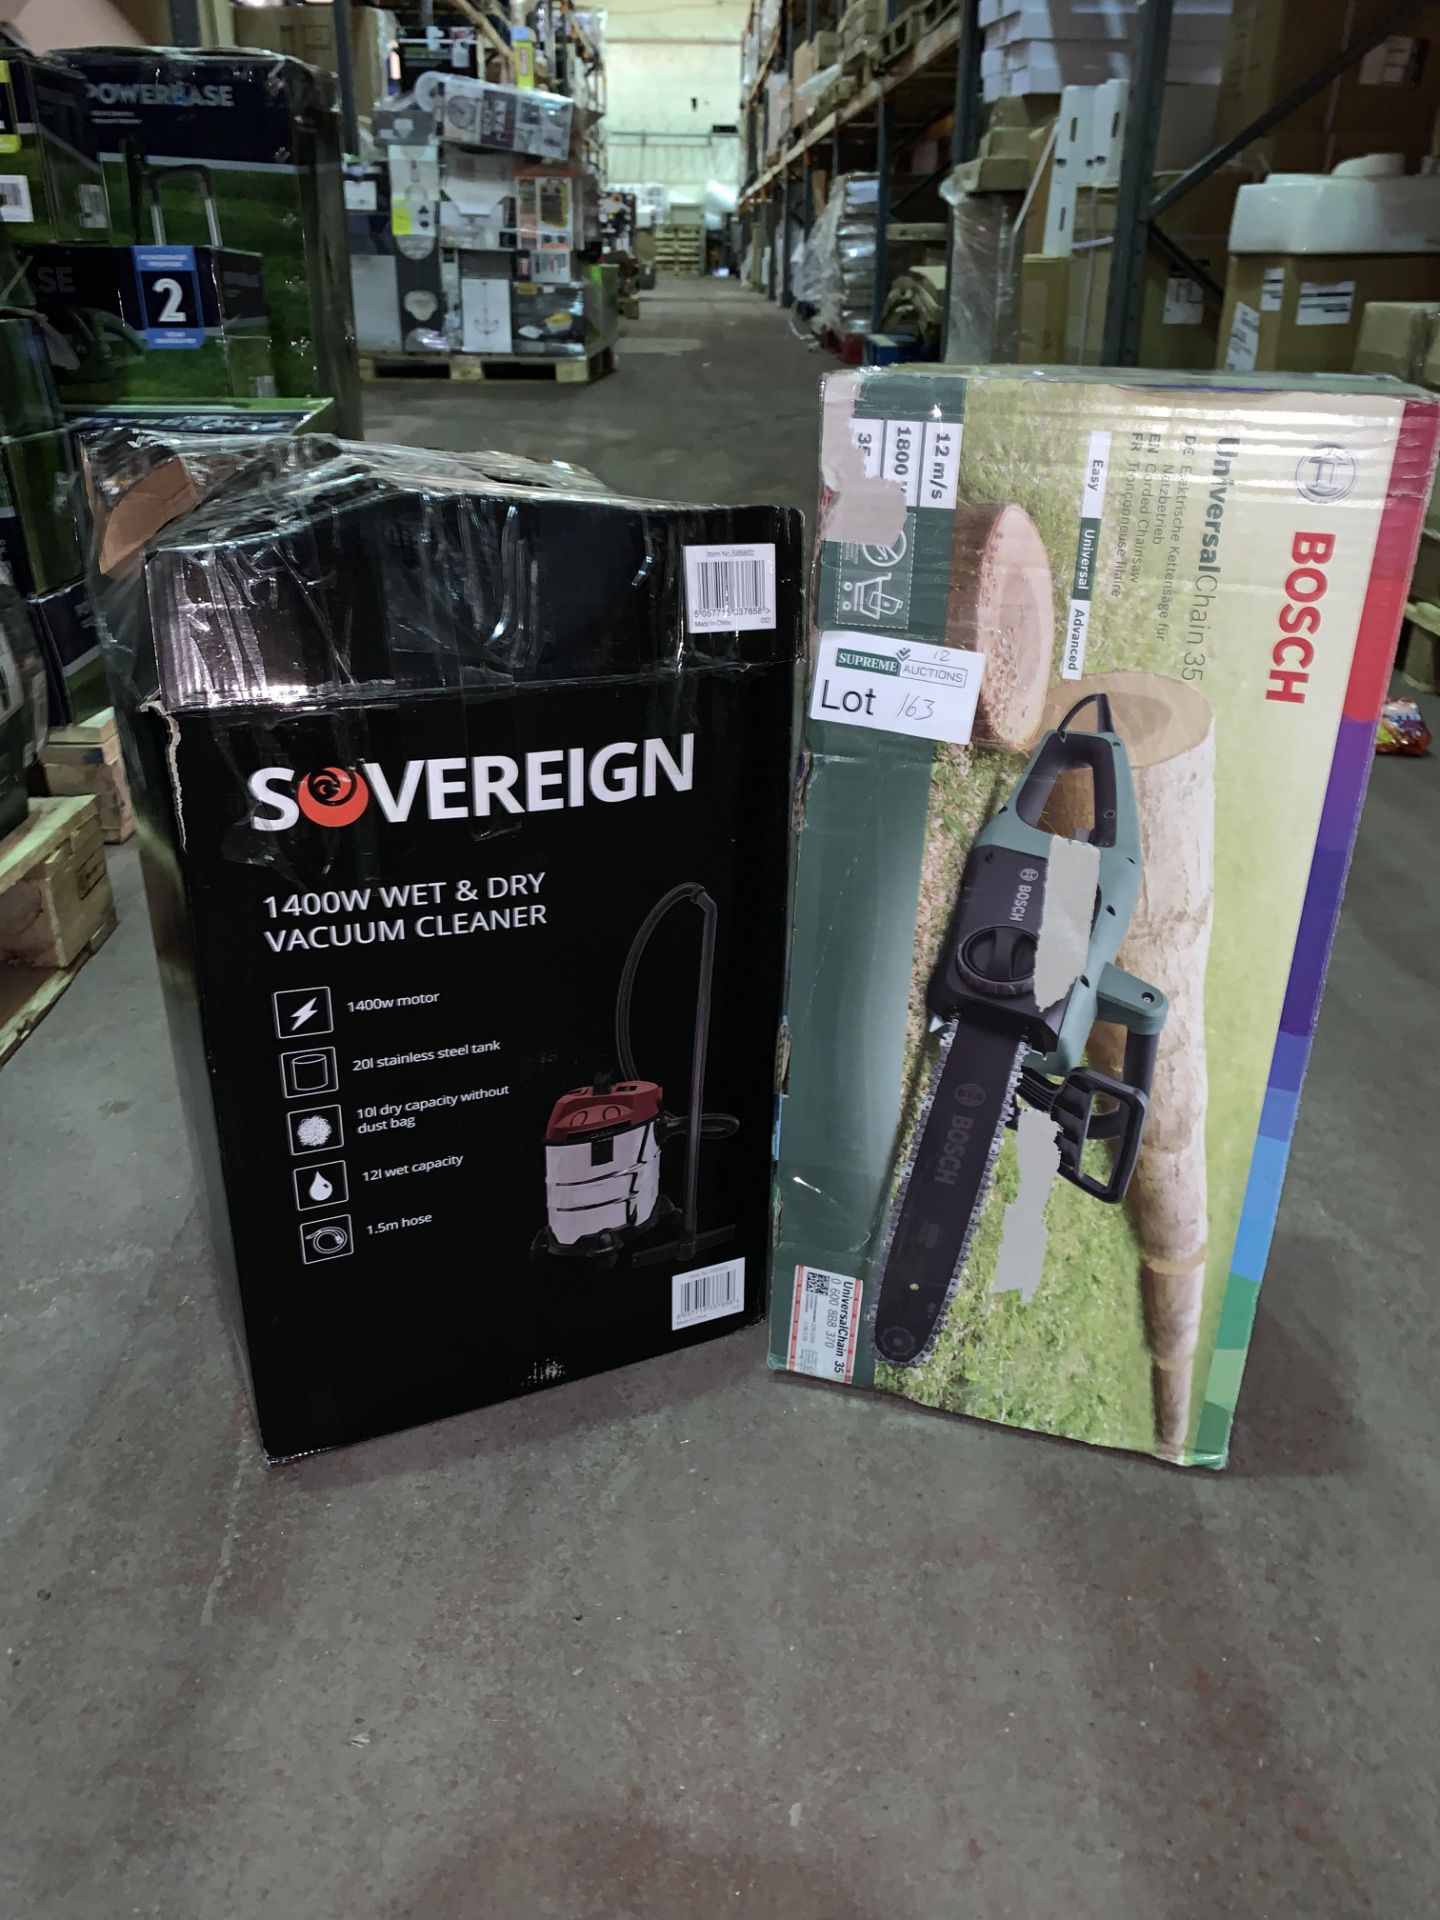 3 X MIXED BOXED, 1 X BOSCH UNIVERSAL CHAINSHAW35 1800W 2 X 1400W SOVEREIGN WET & DRY VACUUM